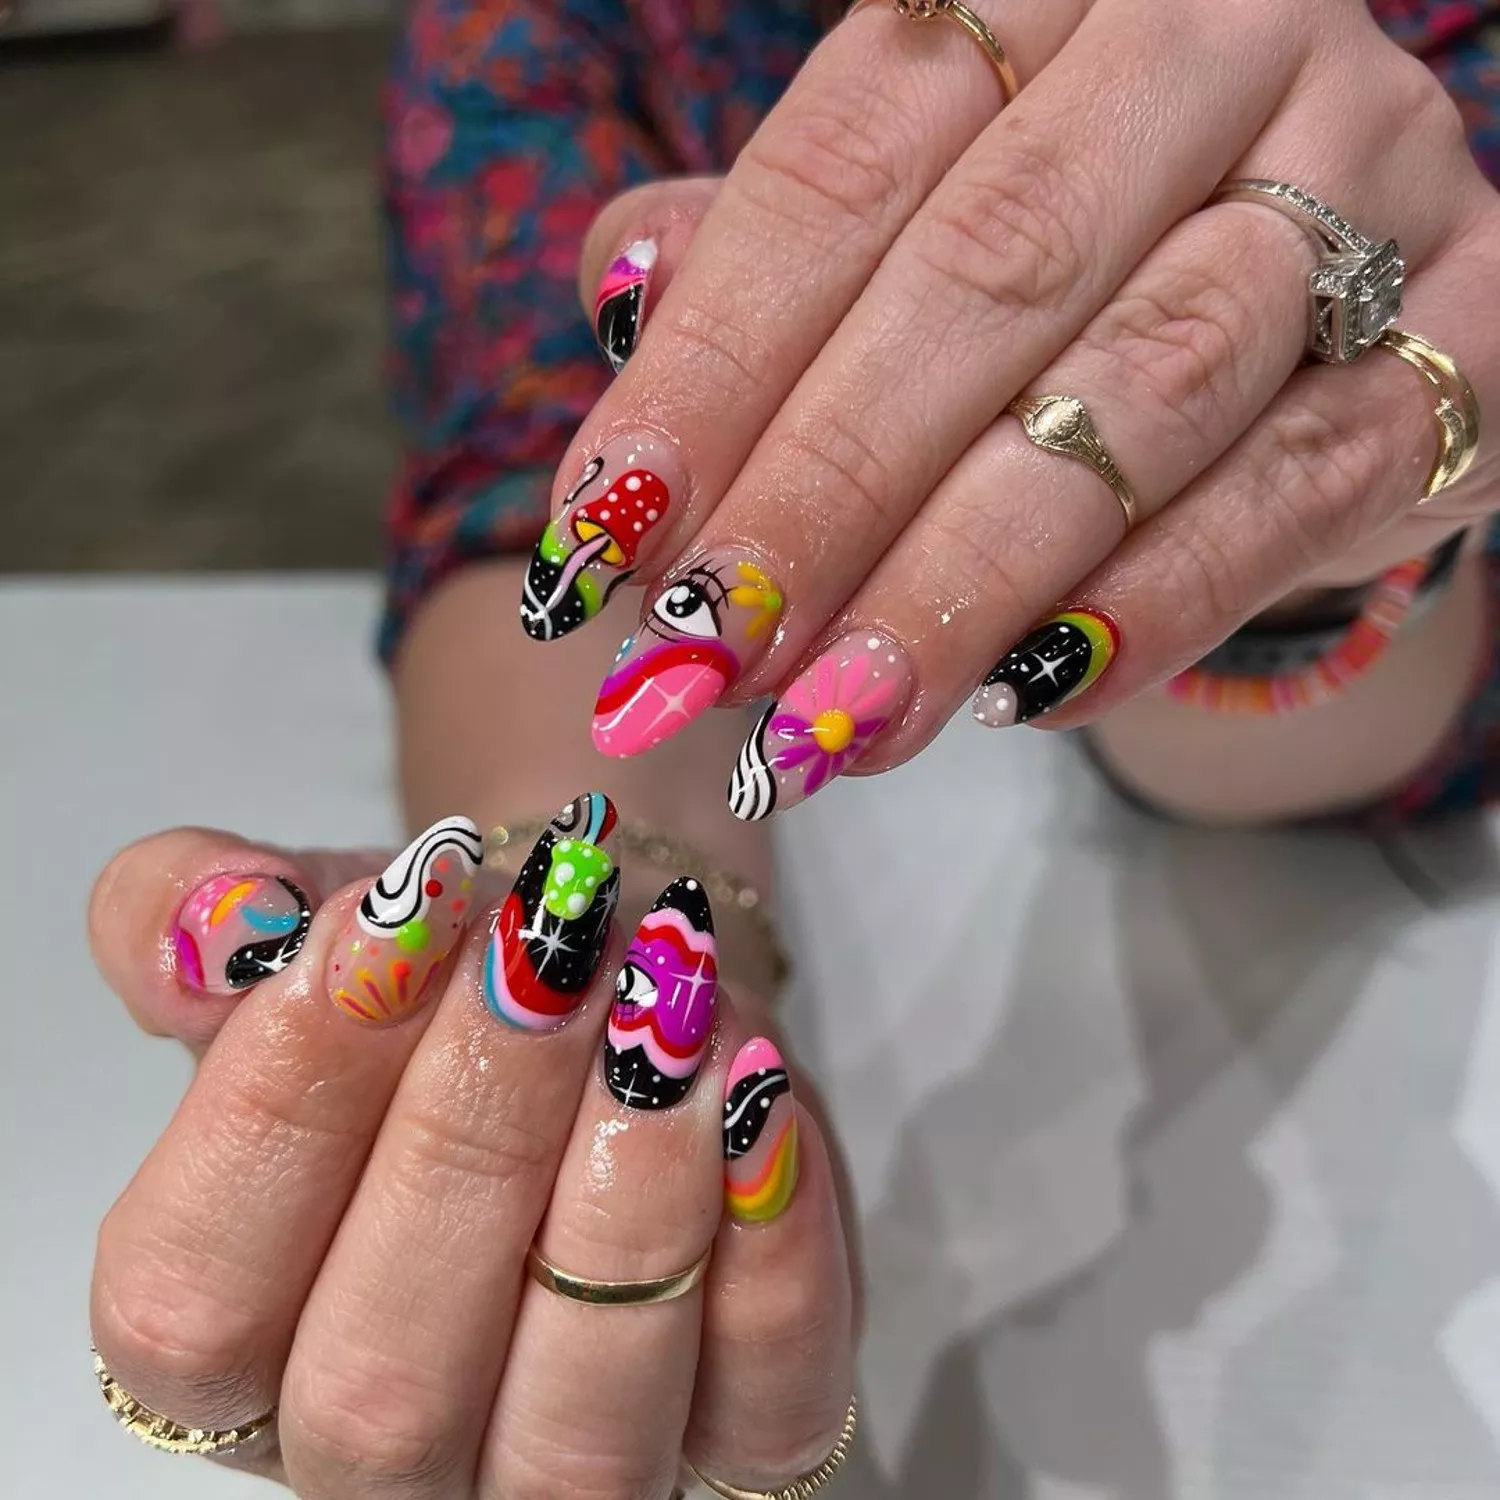 Manicure with mismatched psychedelic designs including eyes, mushrooms, flowers, and rainbows